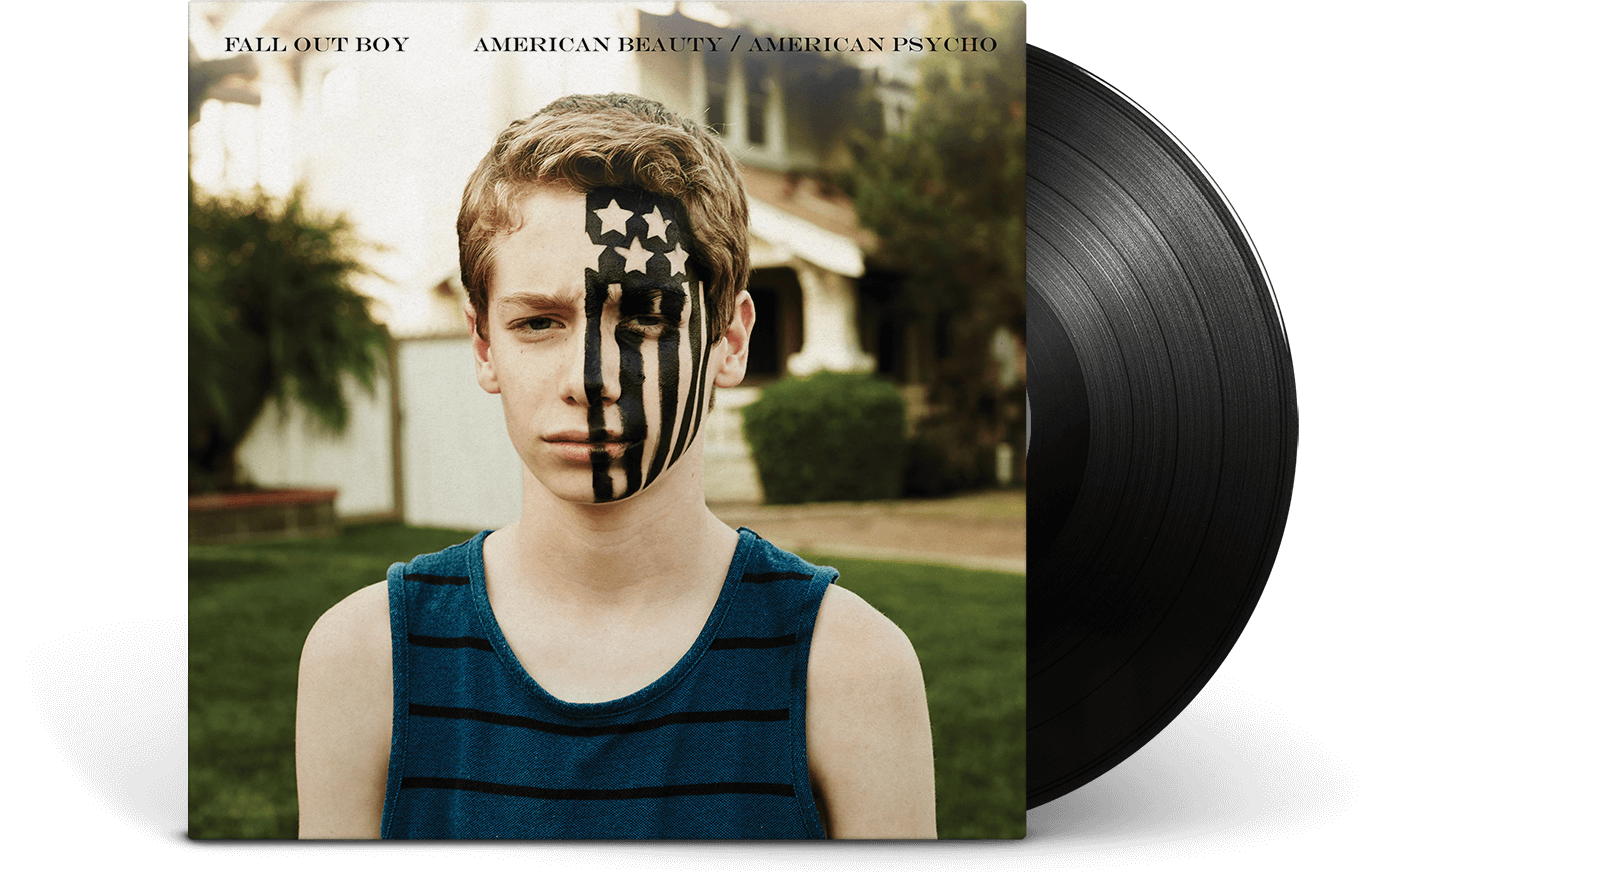 Gripsweat Fall Out Boy American Beauty American Psycho Vinyl Lp Ice Blue Colored New